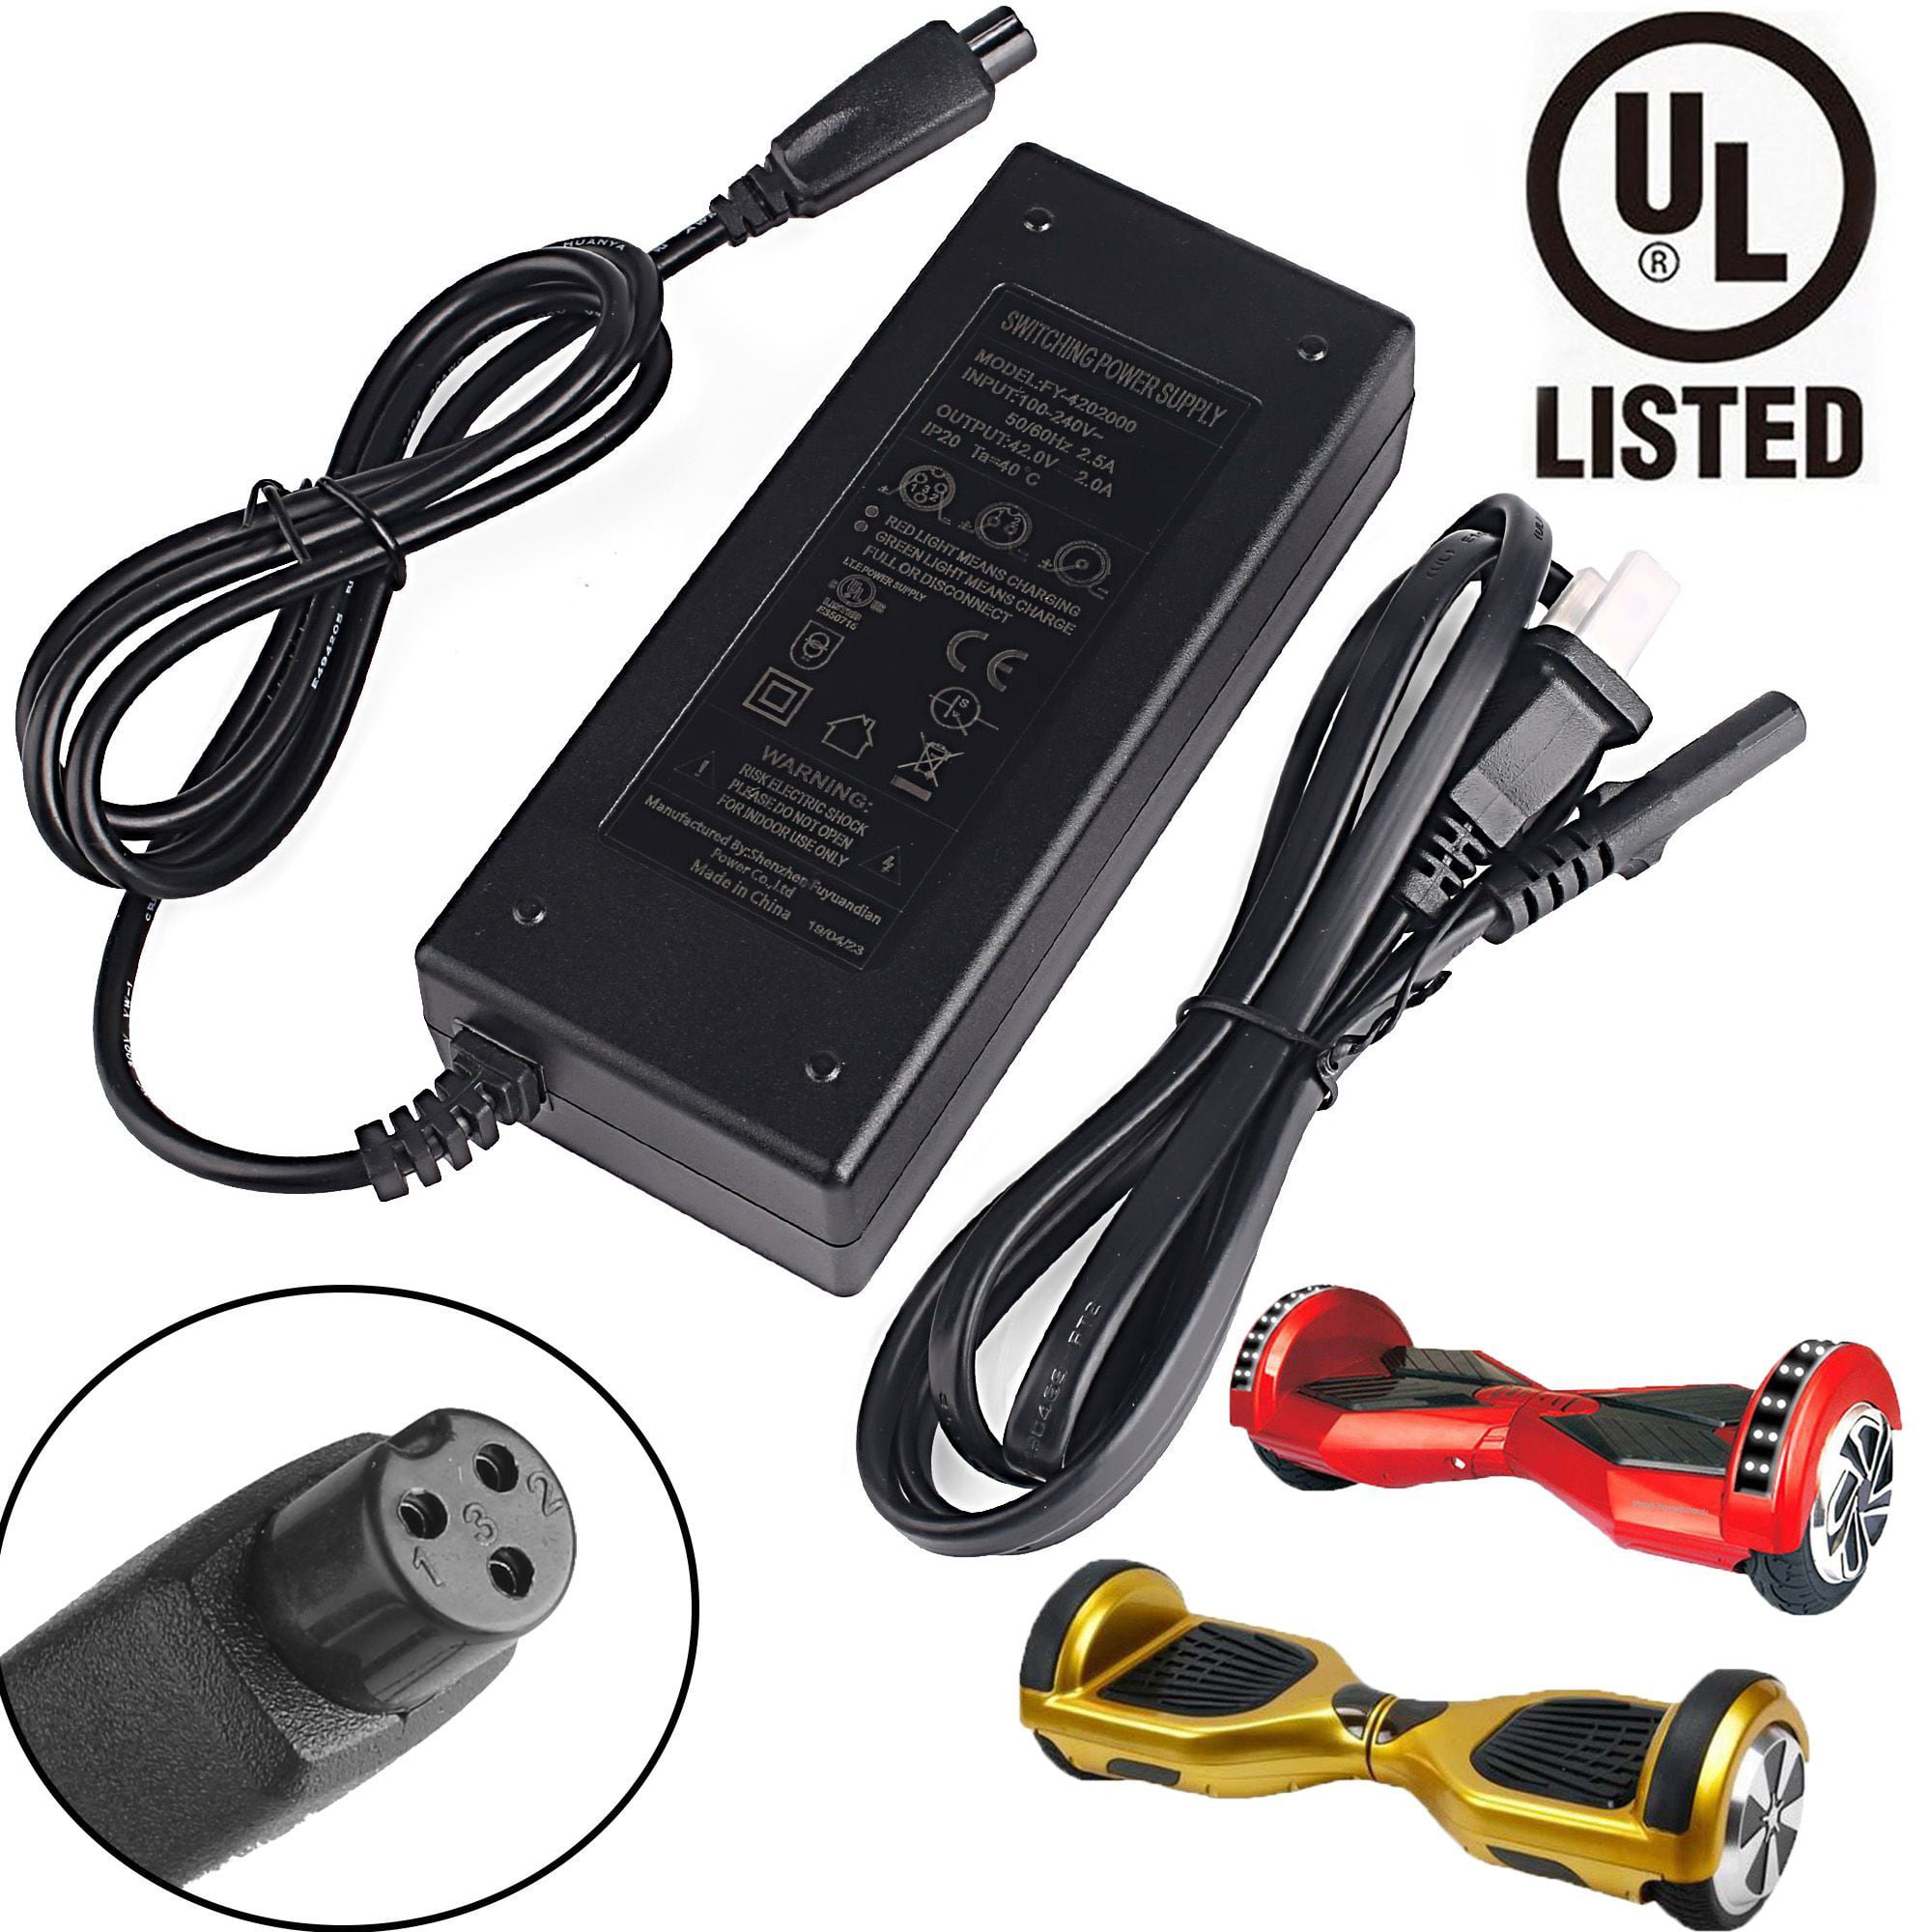 12v 5A Power Adapter Battery Charger For Two Wheel Smart Self Balance Scooter 